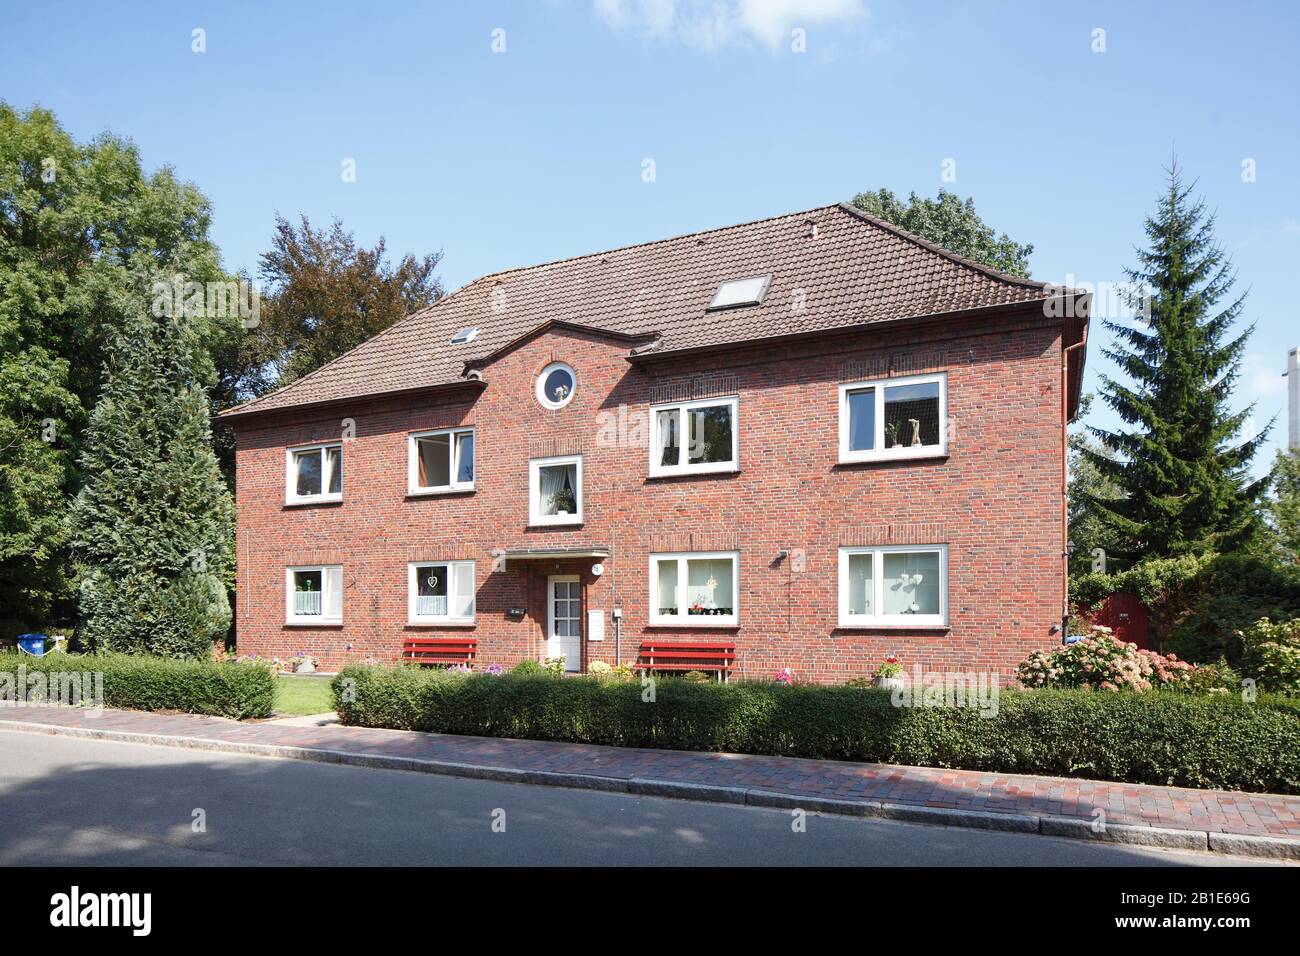 Residential building made of brick, Brake, Wesermarsch district, Lower Saxony, Germany Stock Photo